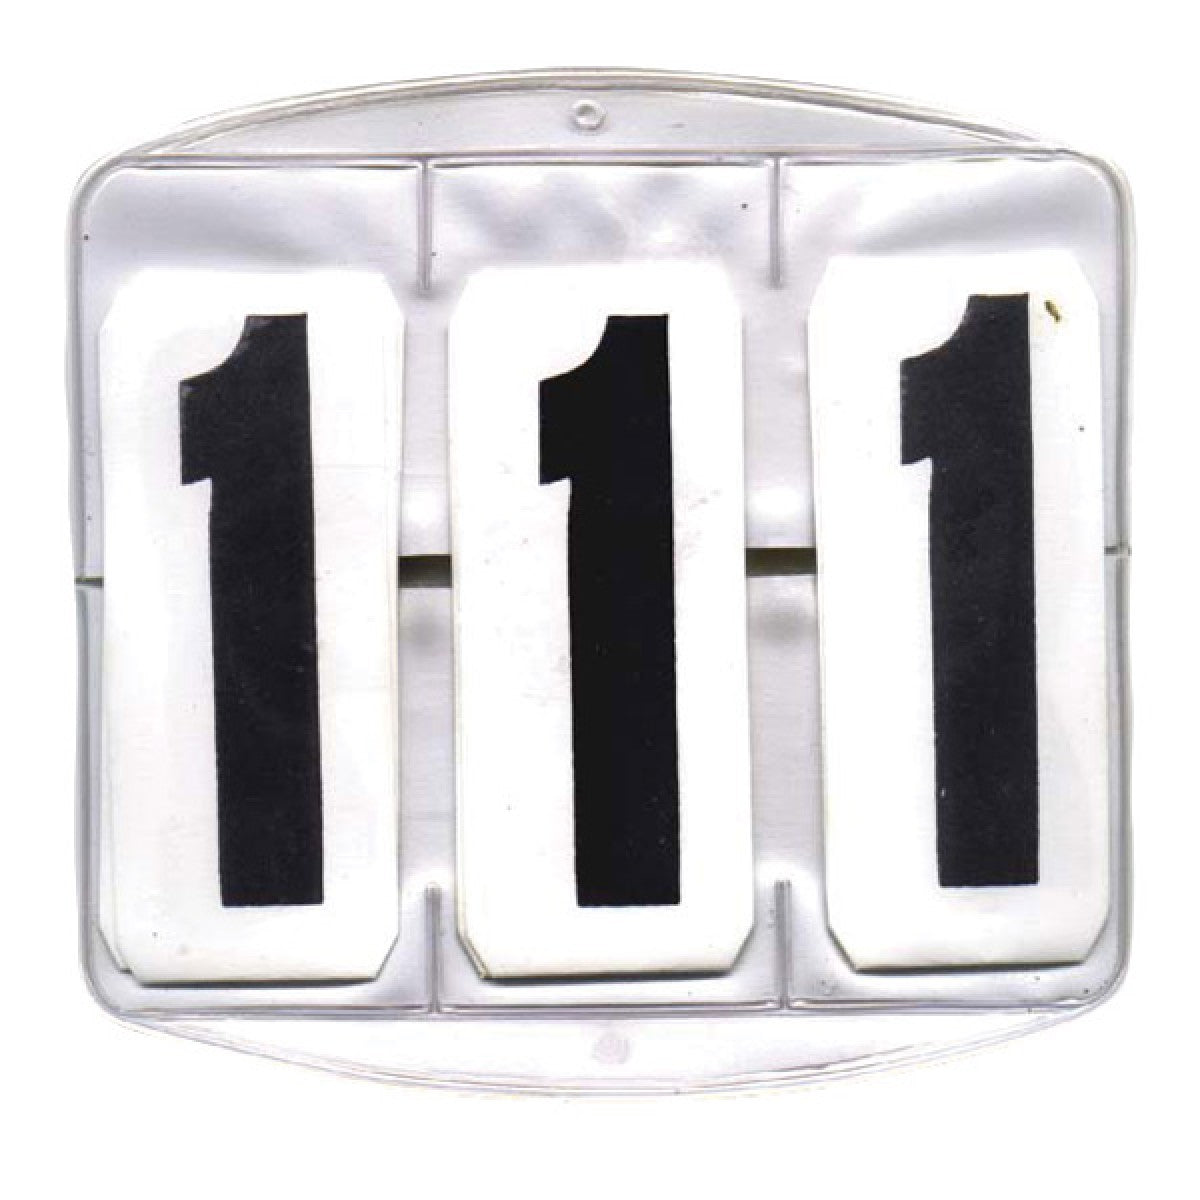 Roma Competition 3 Digit Number Set